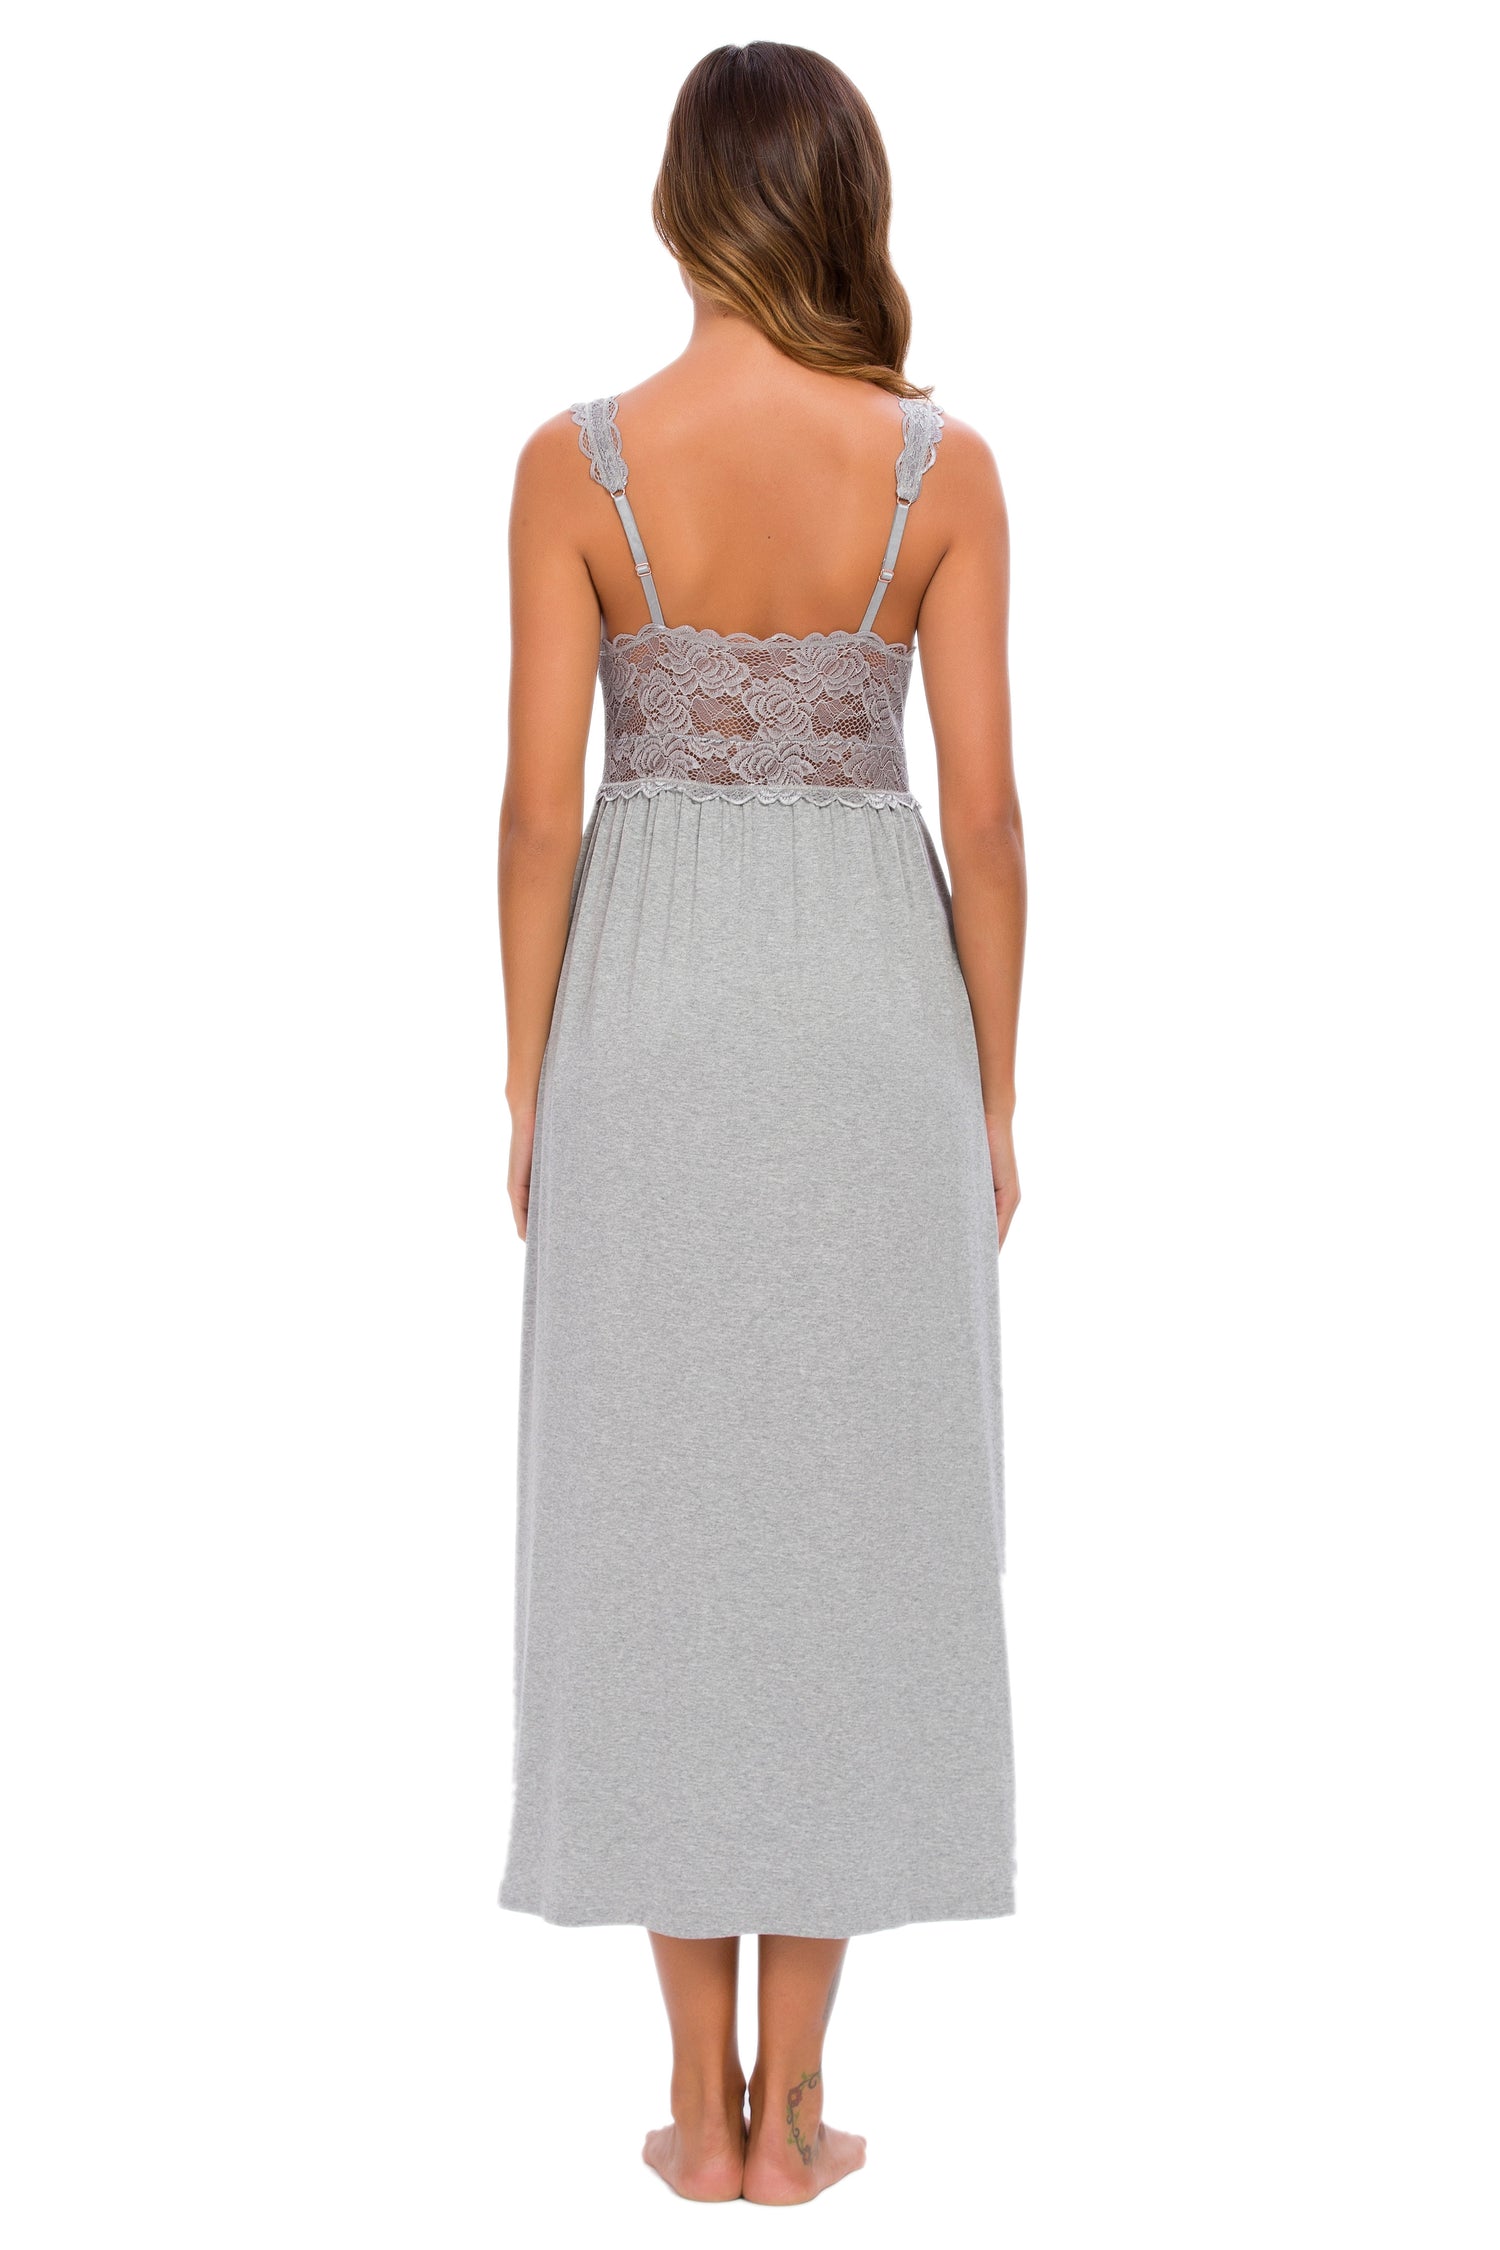 Sexy Lace Jersey  Elegant Long Nightgown Chemises Grey